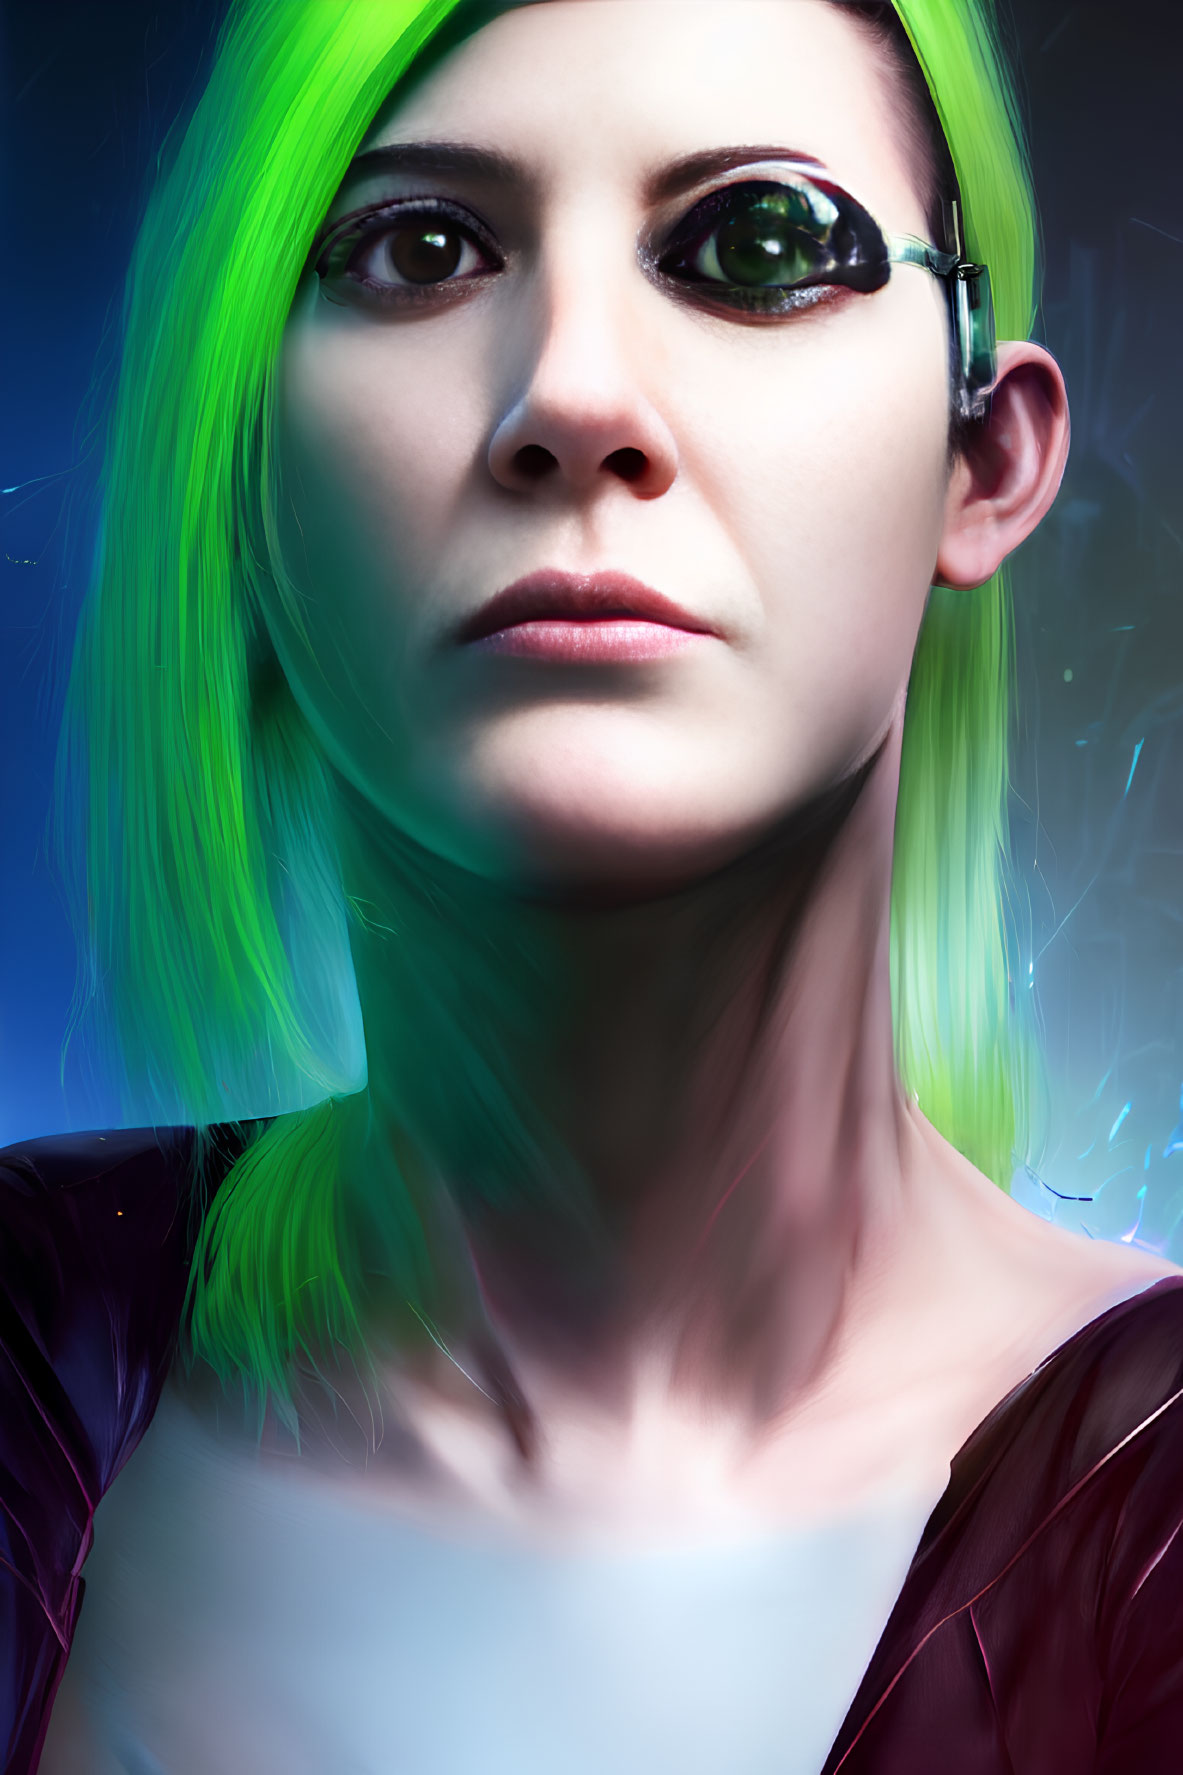 Portrait of Woman with Neon Green Hair, Piercing Eyes, Dark Eye Makeup, Glasses, Purple Out